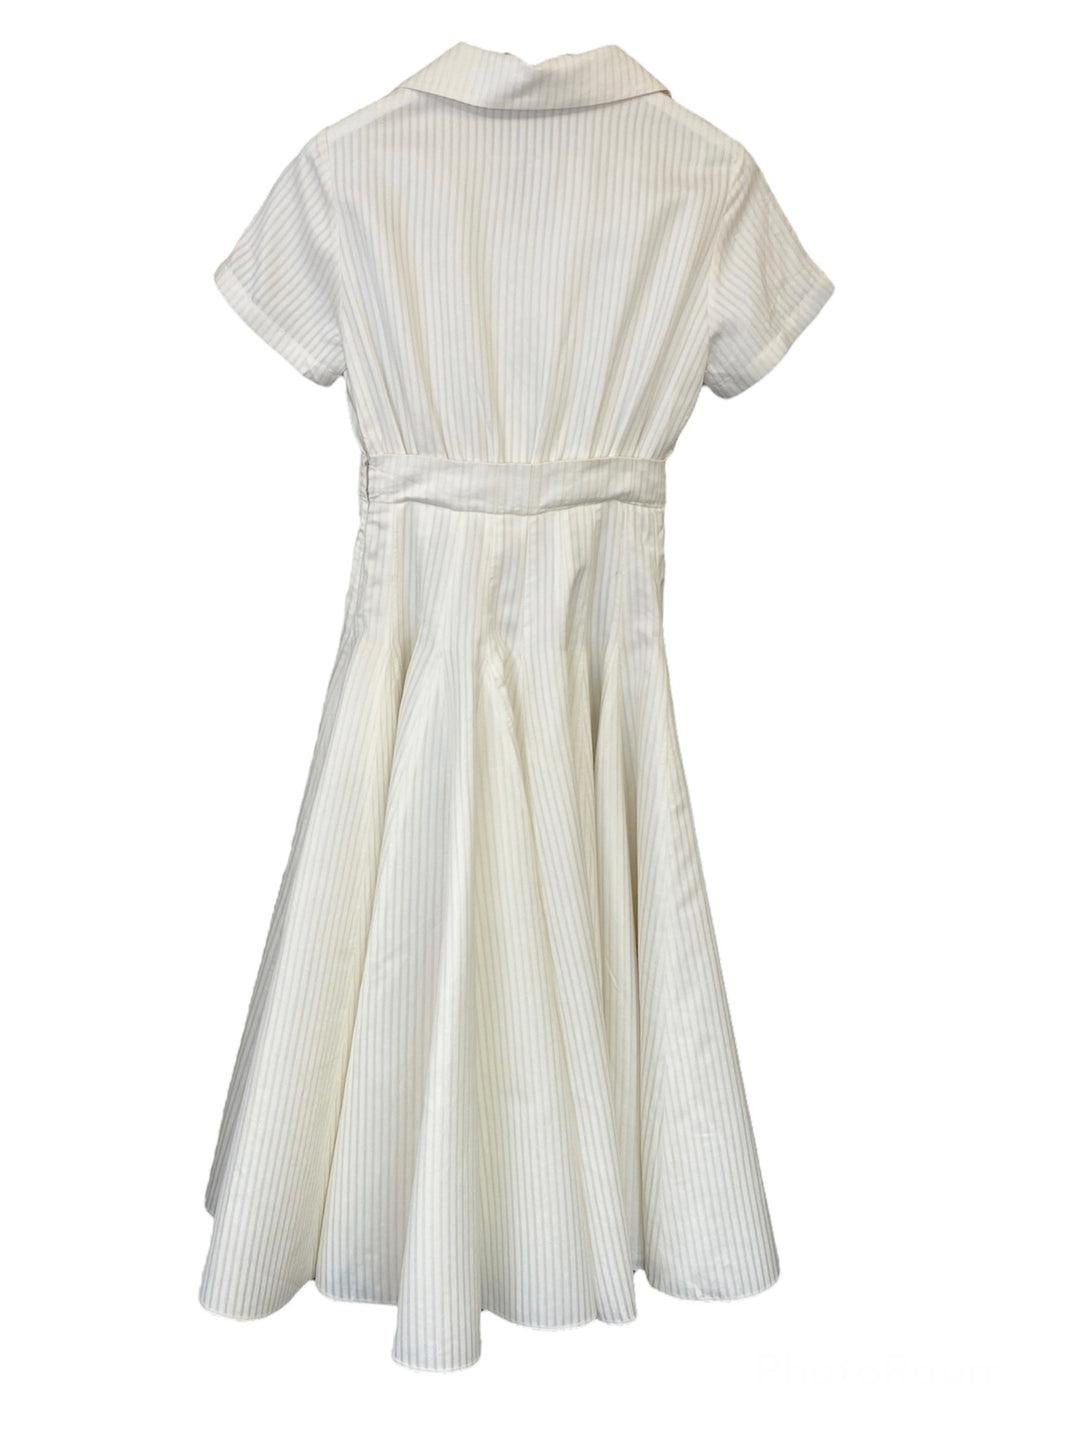 Women's Christian Dior Woven Pleated Mid Length Dress For Sale